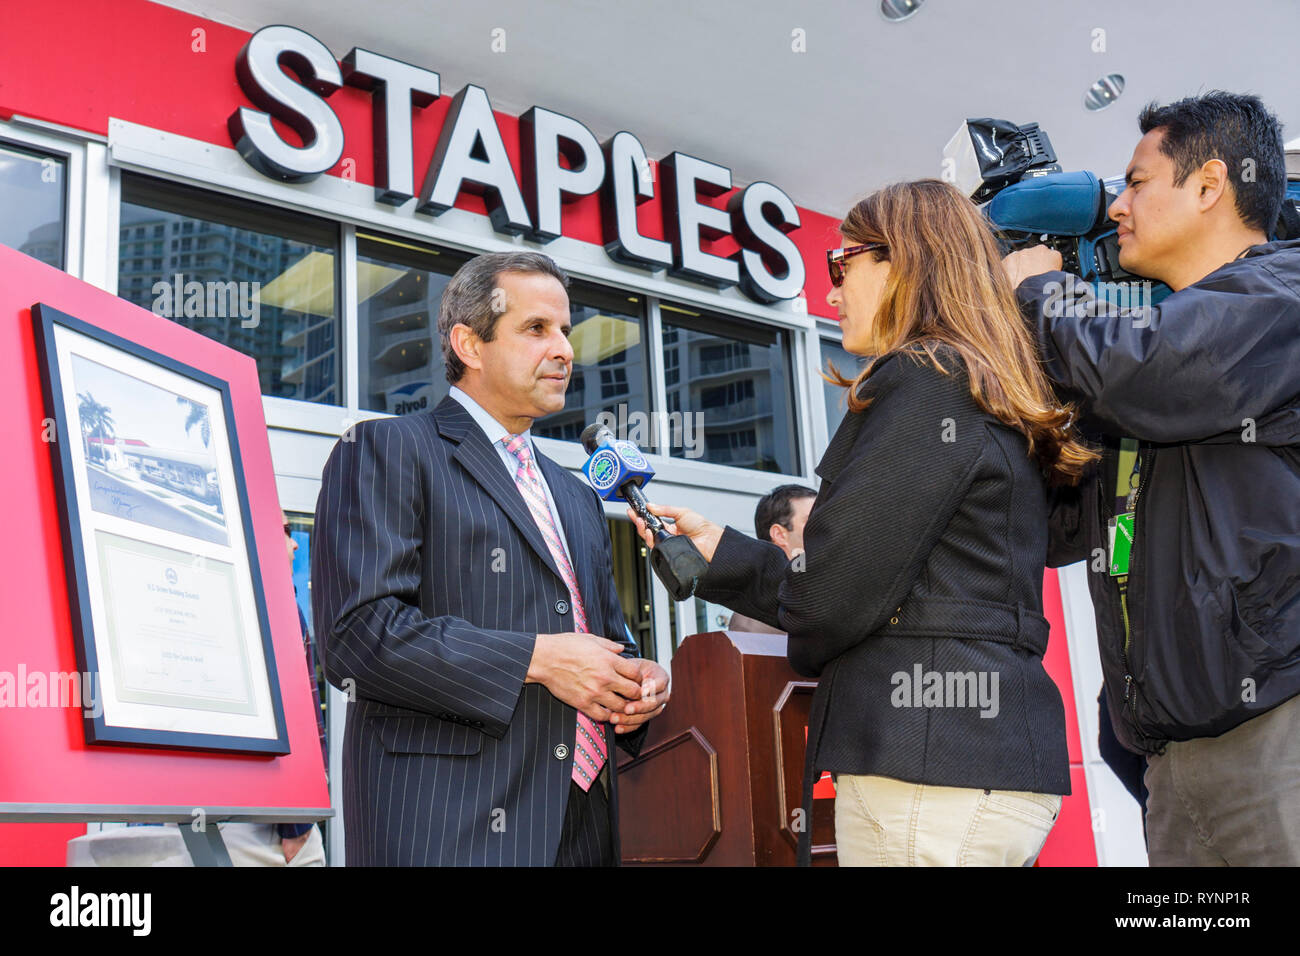 Miami Florida,Staples,office supply products store,chain,receives Green building Council LEED Gold Certification,Green movement,ceremony,man men male, Stock Photo